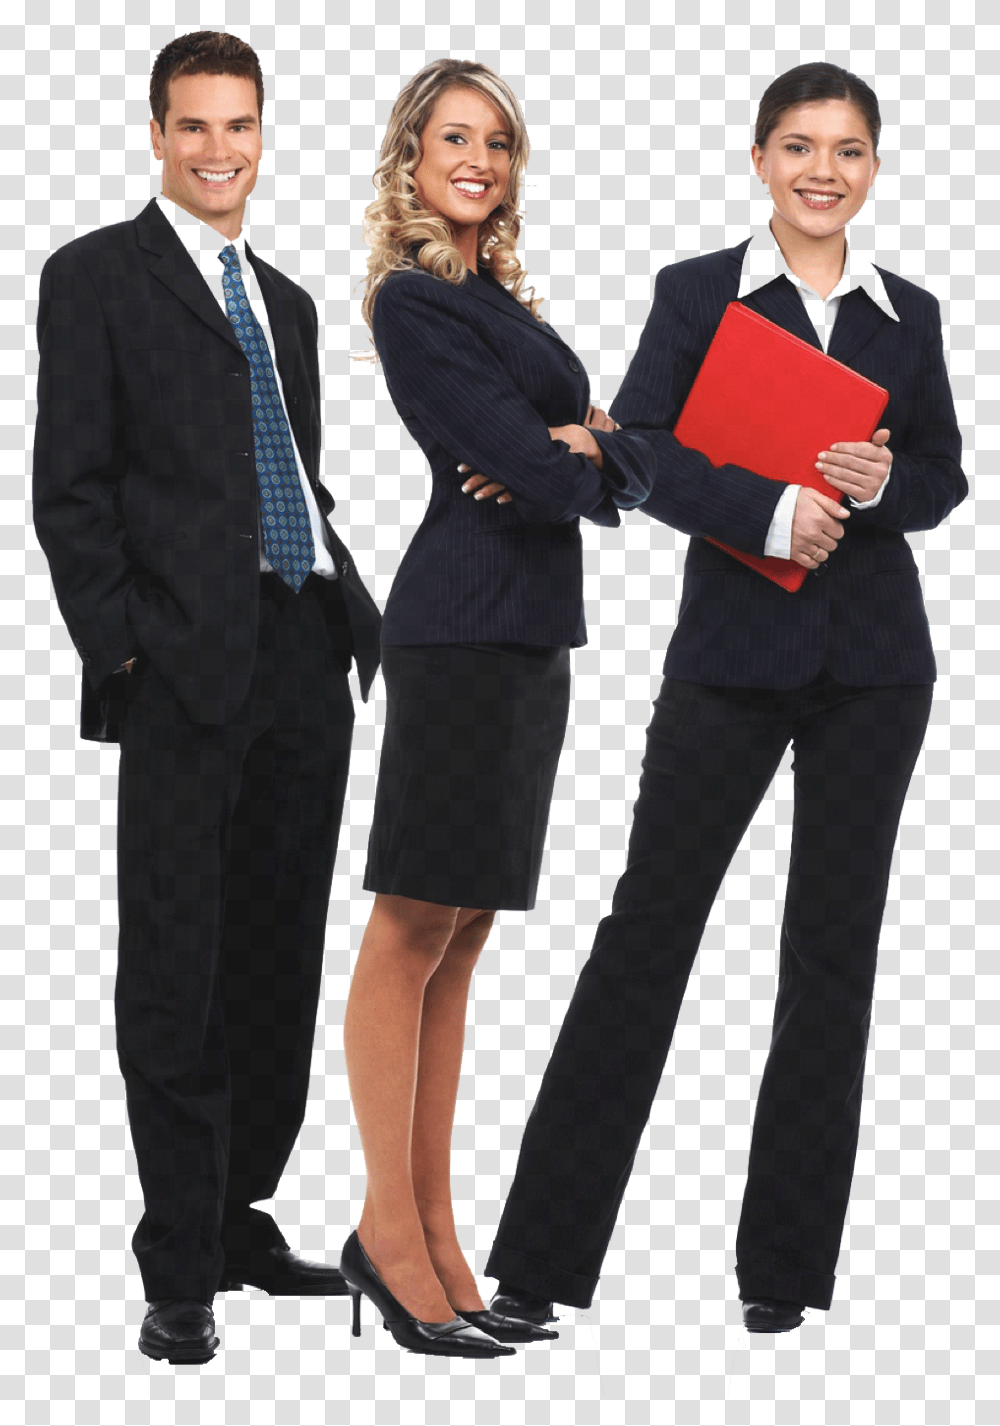 Business People Dress Code Business Professional, Tie, Suit, Overcoat Transparent Png